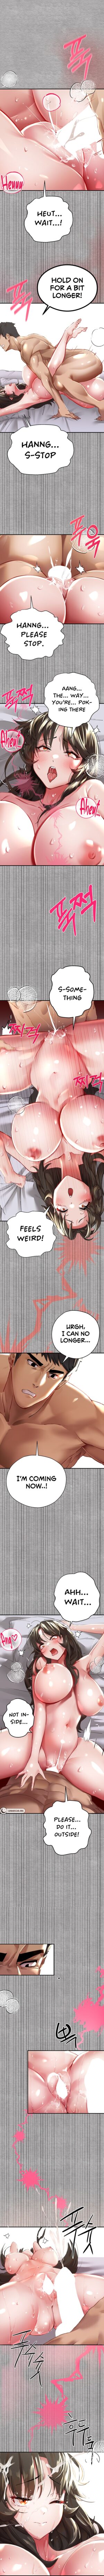 [Duke Hangul, Na Sunhyang] I Have To Sleep With A Stranger? (1-21) [English] [Lunar Scans] [Ongoing]